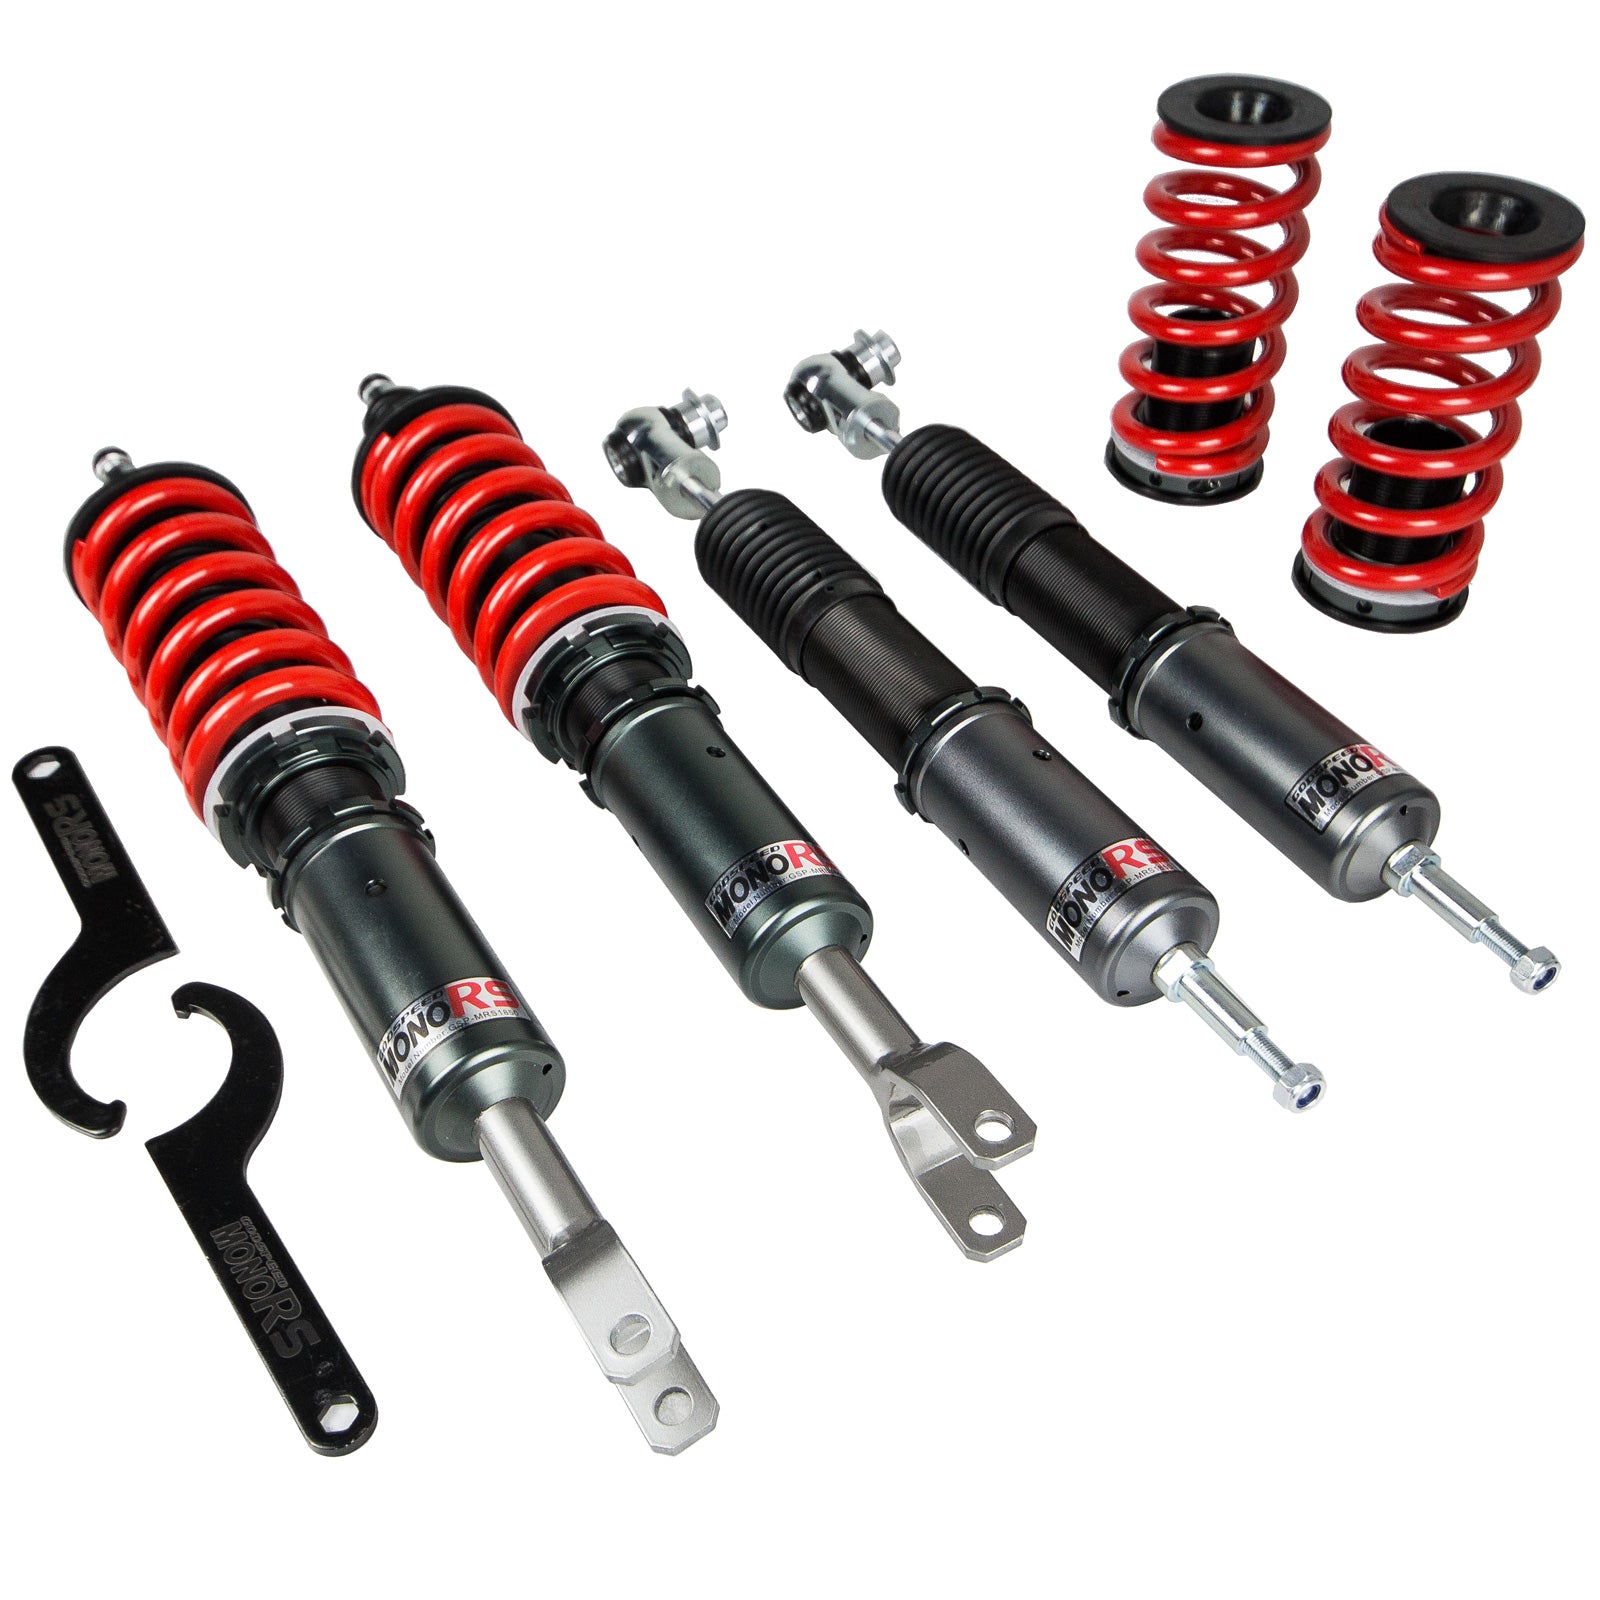 Godspeed MRS1850-B MonoRS Coilover Lowering Kit, 32 Damping Adjustment, Ride Height Adjustable